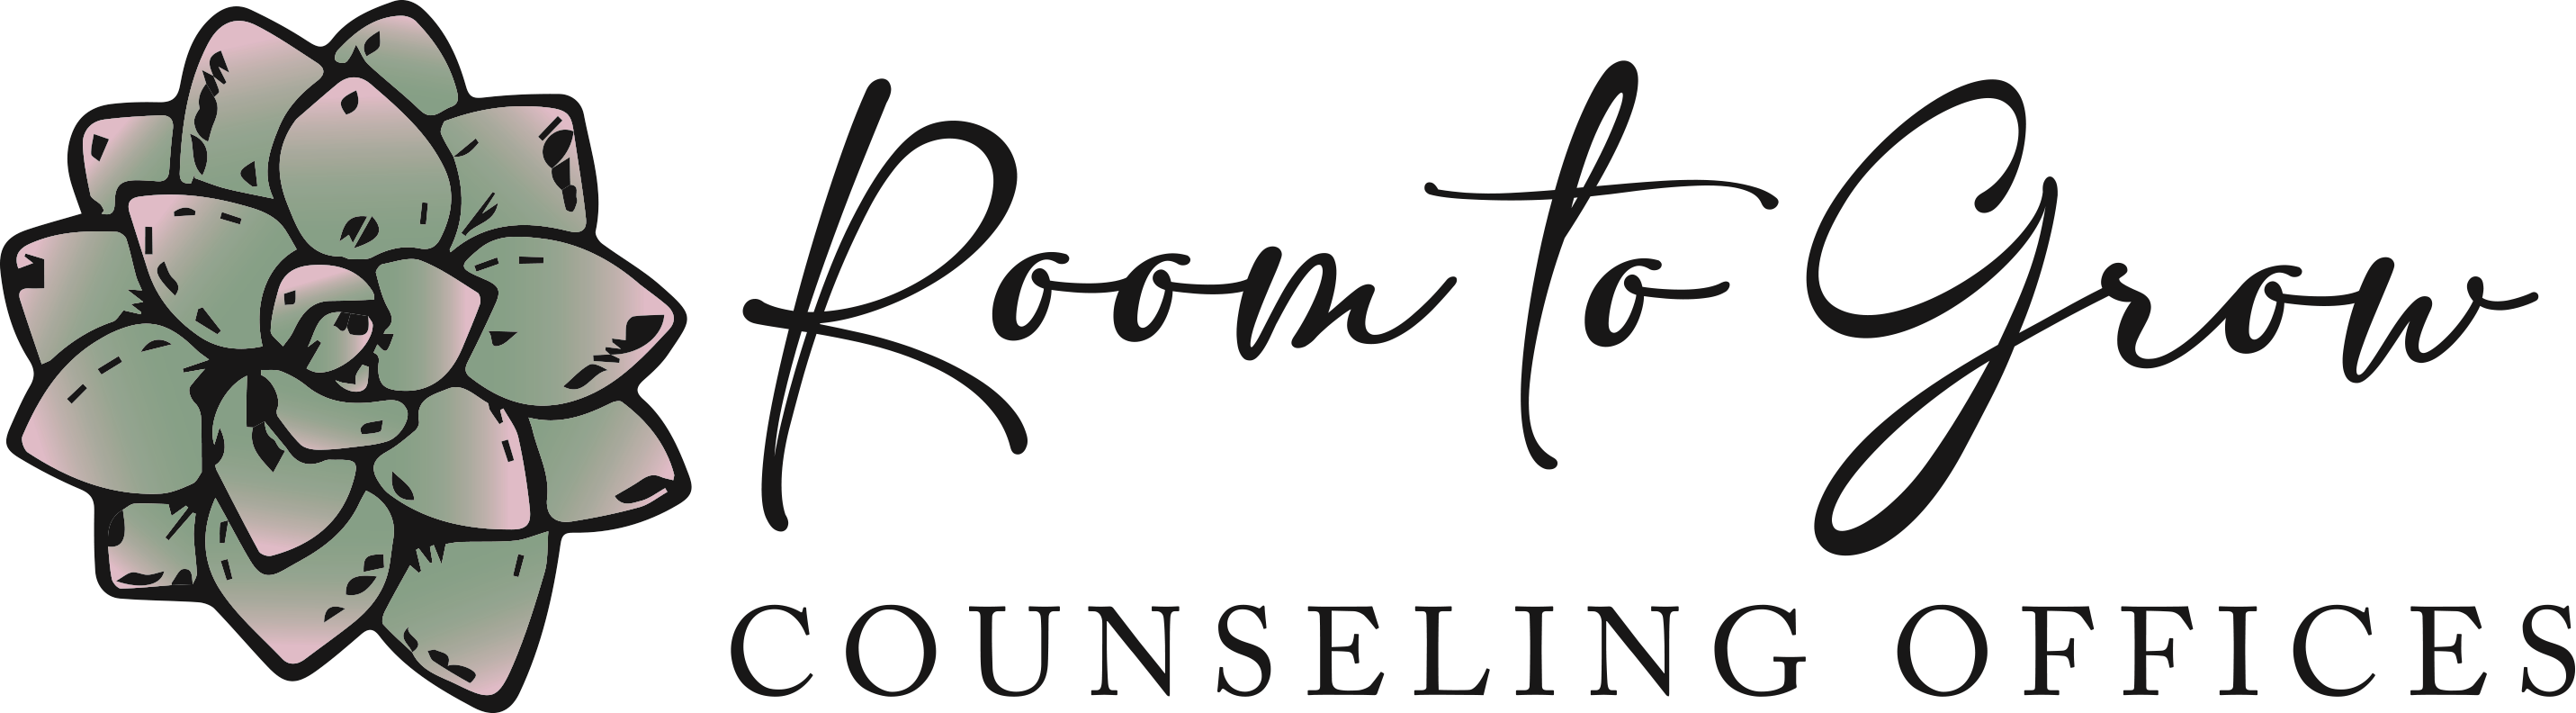 Room To Grow Counseling Offices Logo